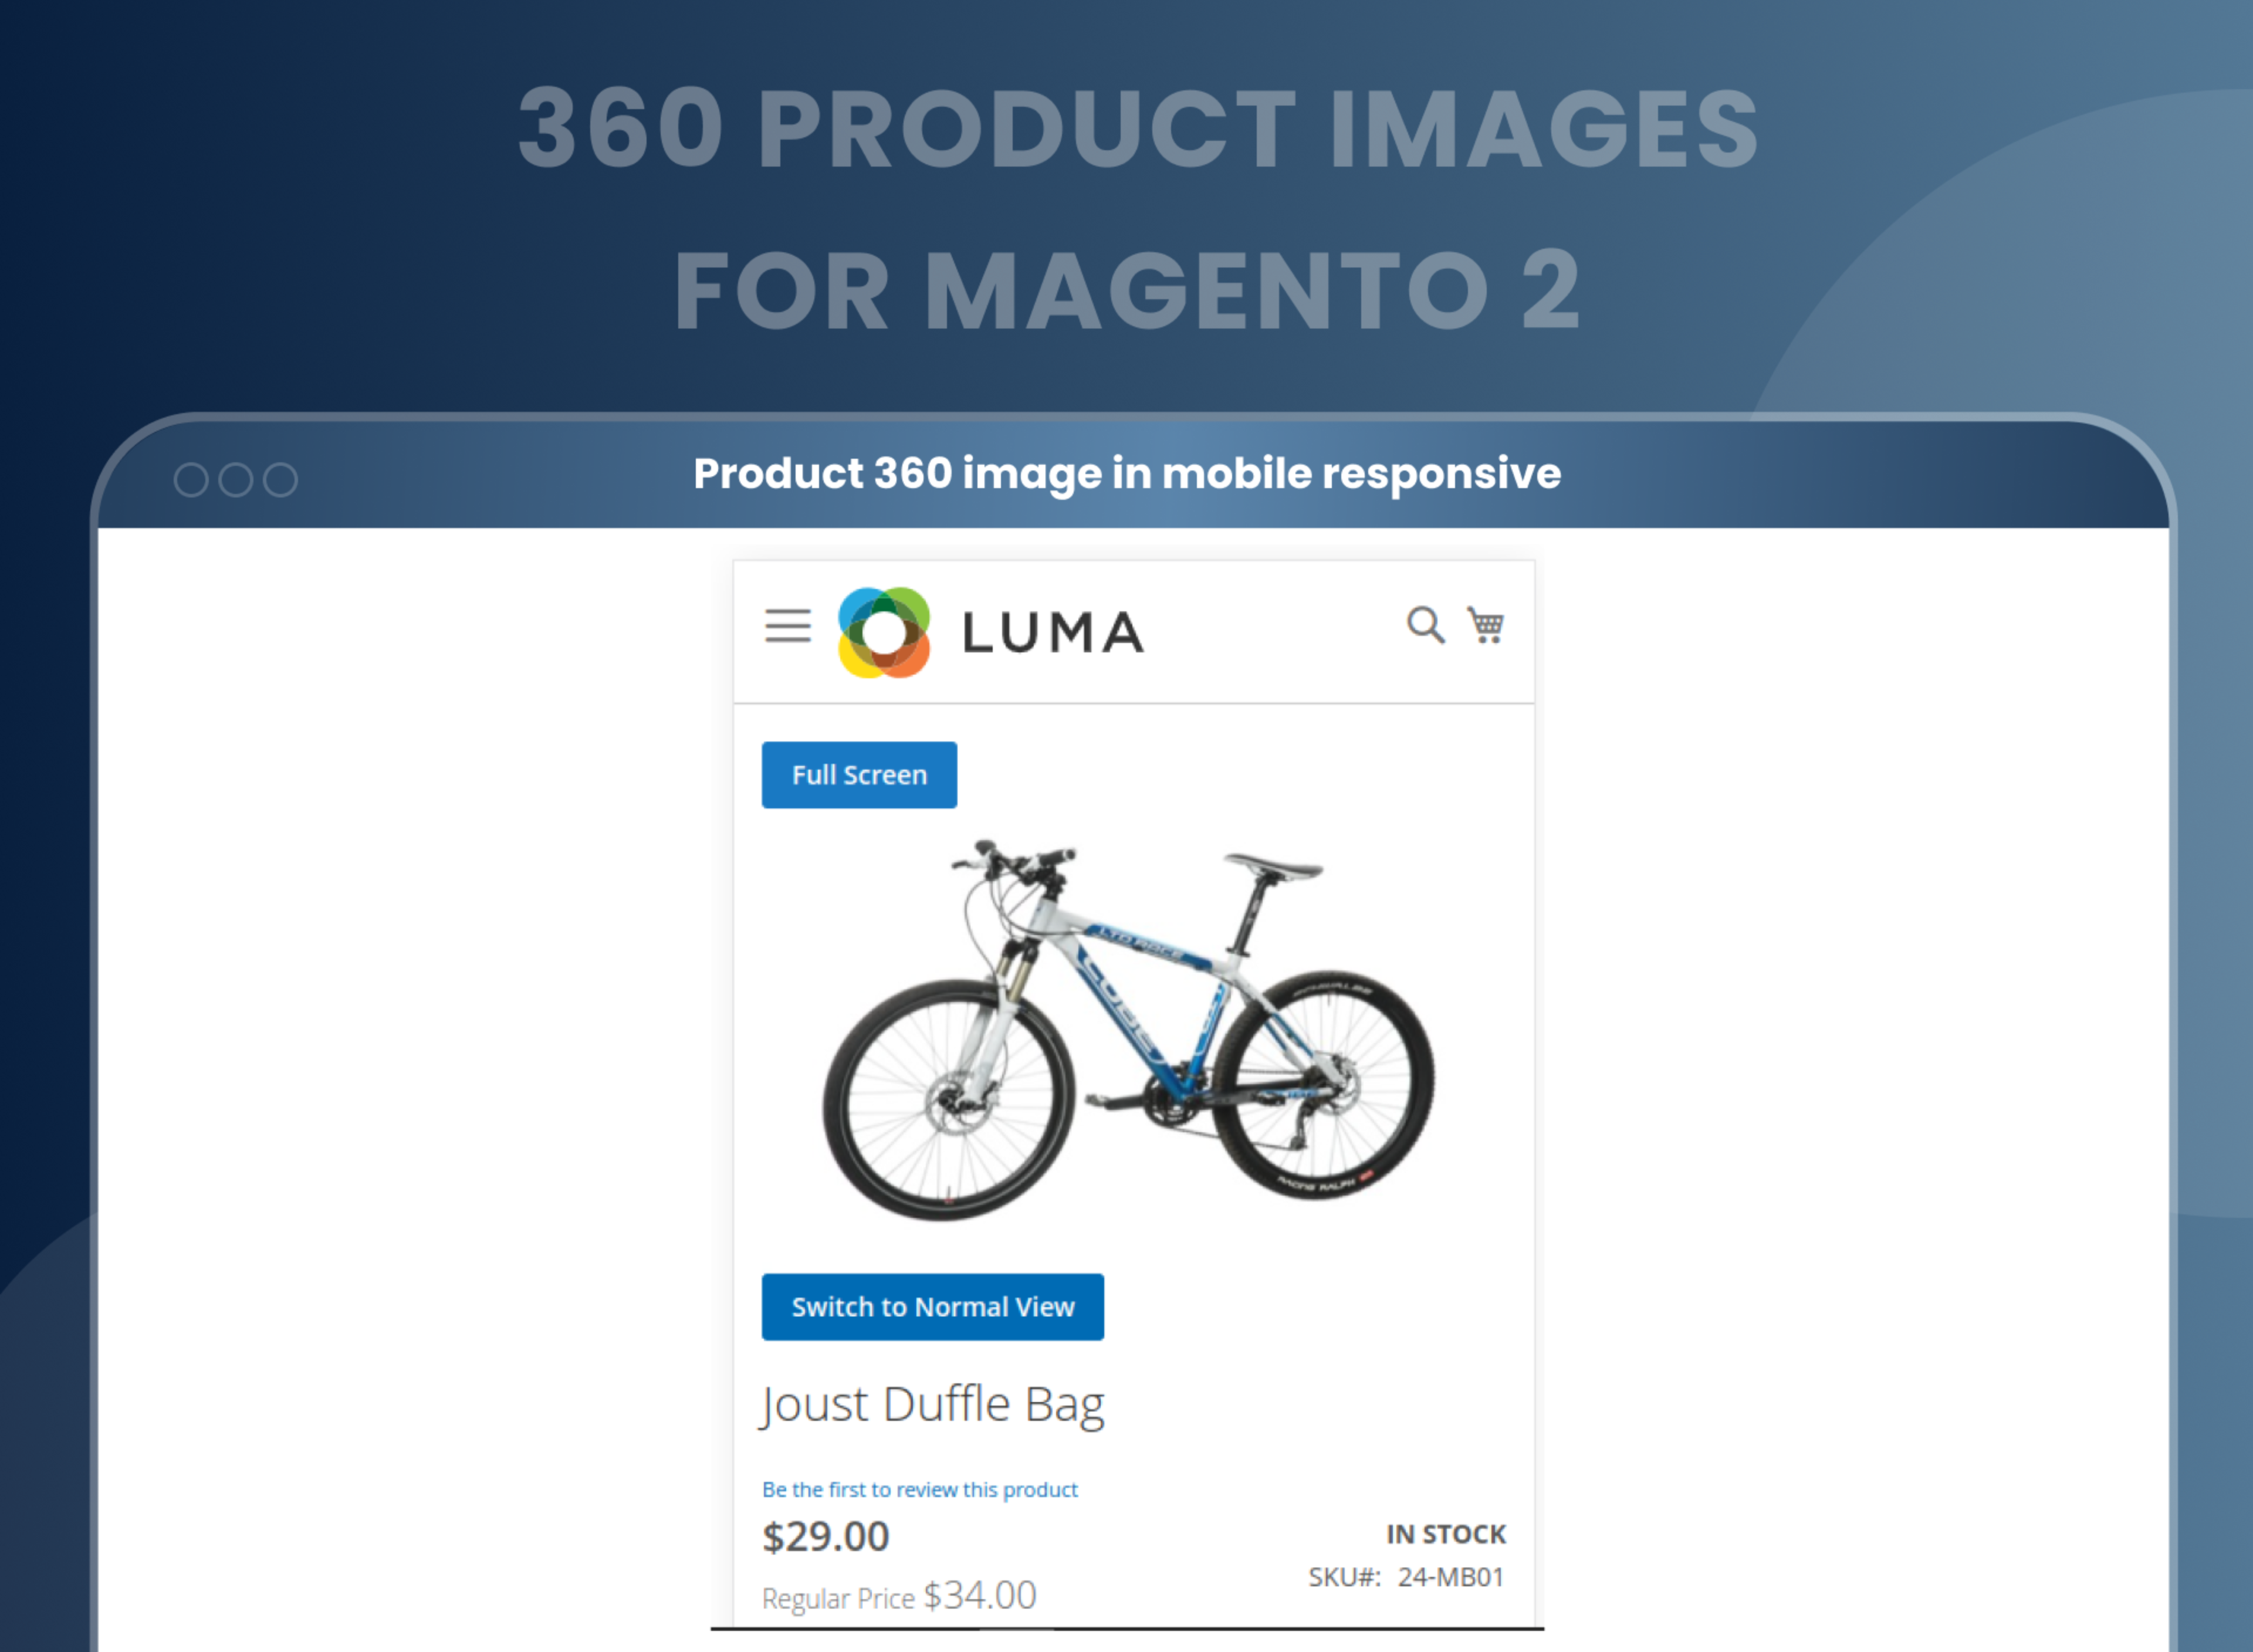 Product 360 image in mobile responsive